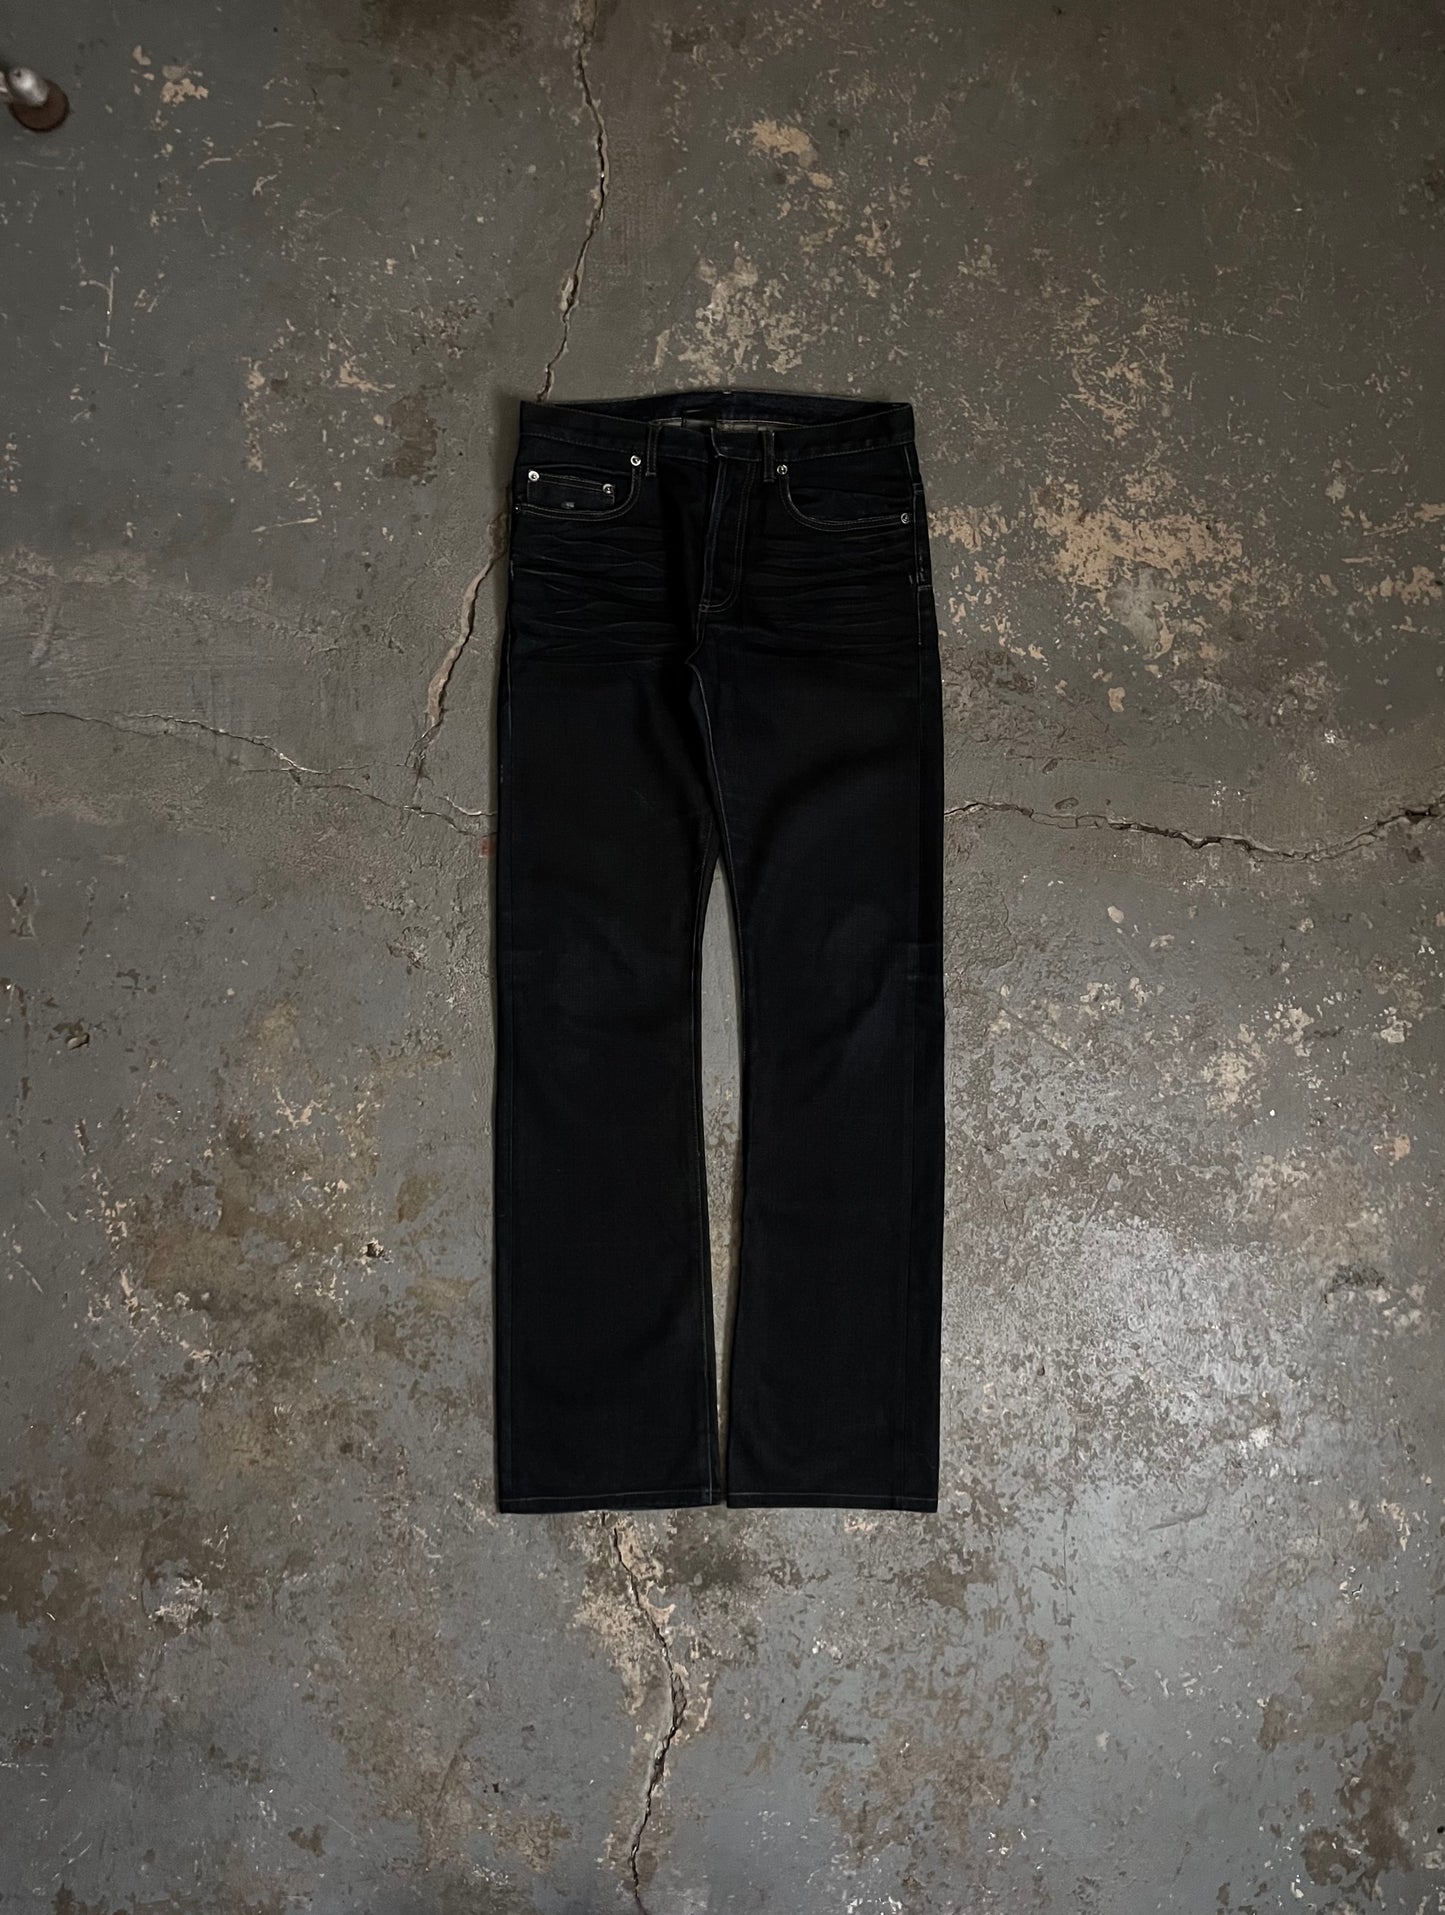 Dior AW05 “In The Morning” Wax Boot Cut Jeans